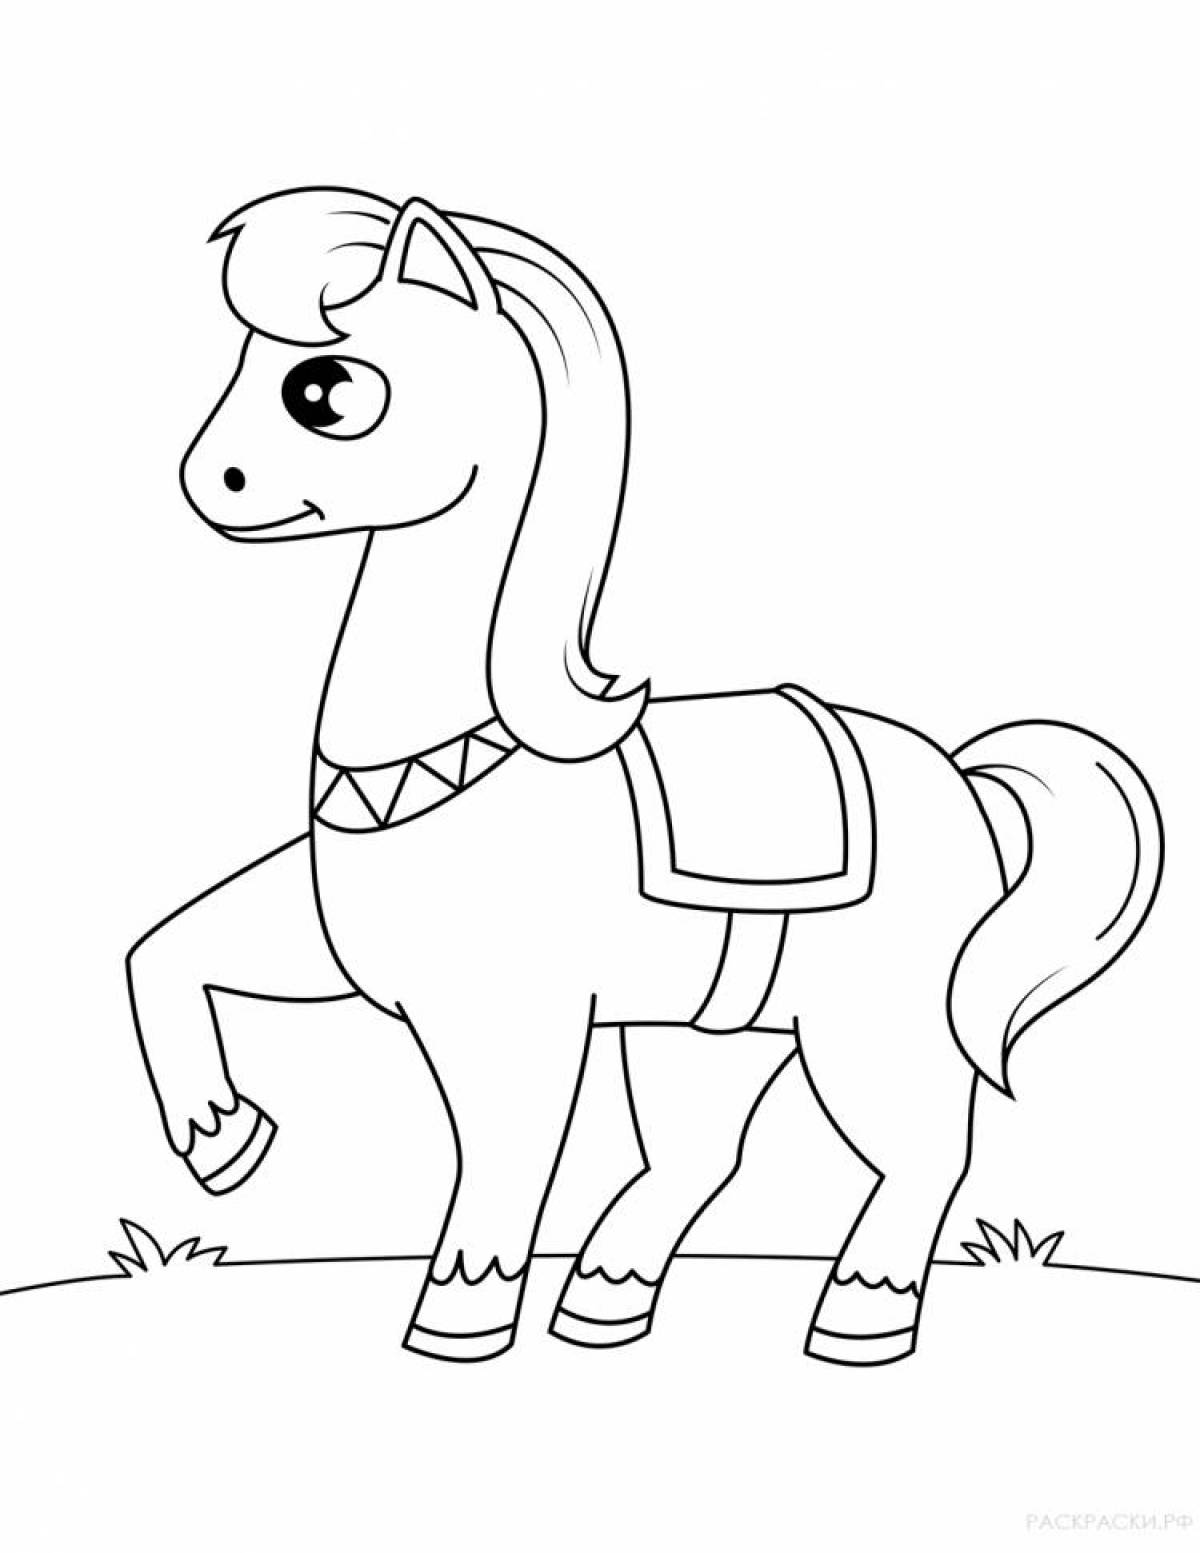 Majestic horse coloring book for kids